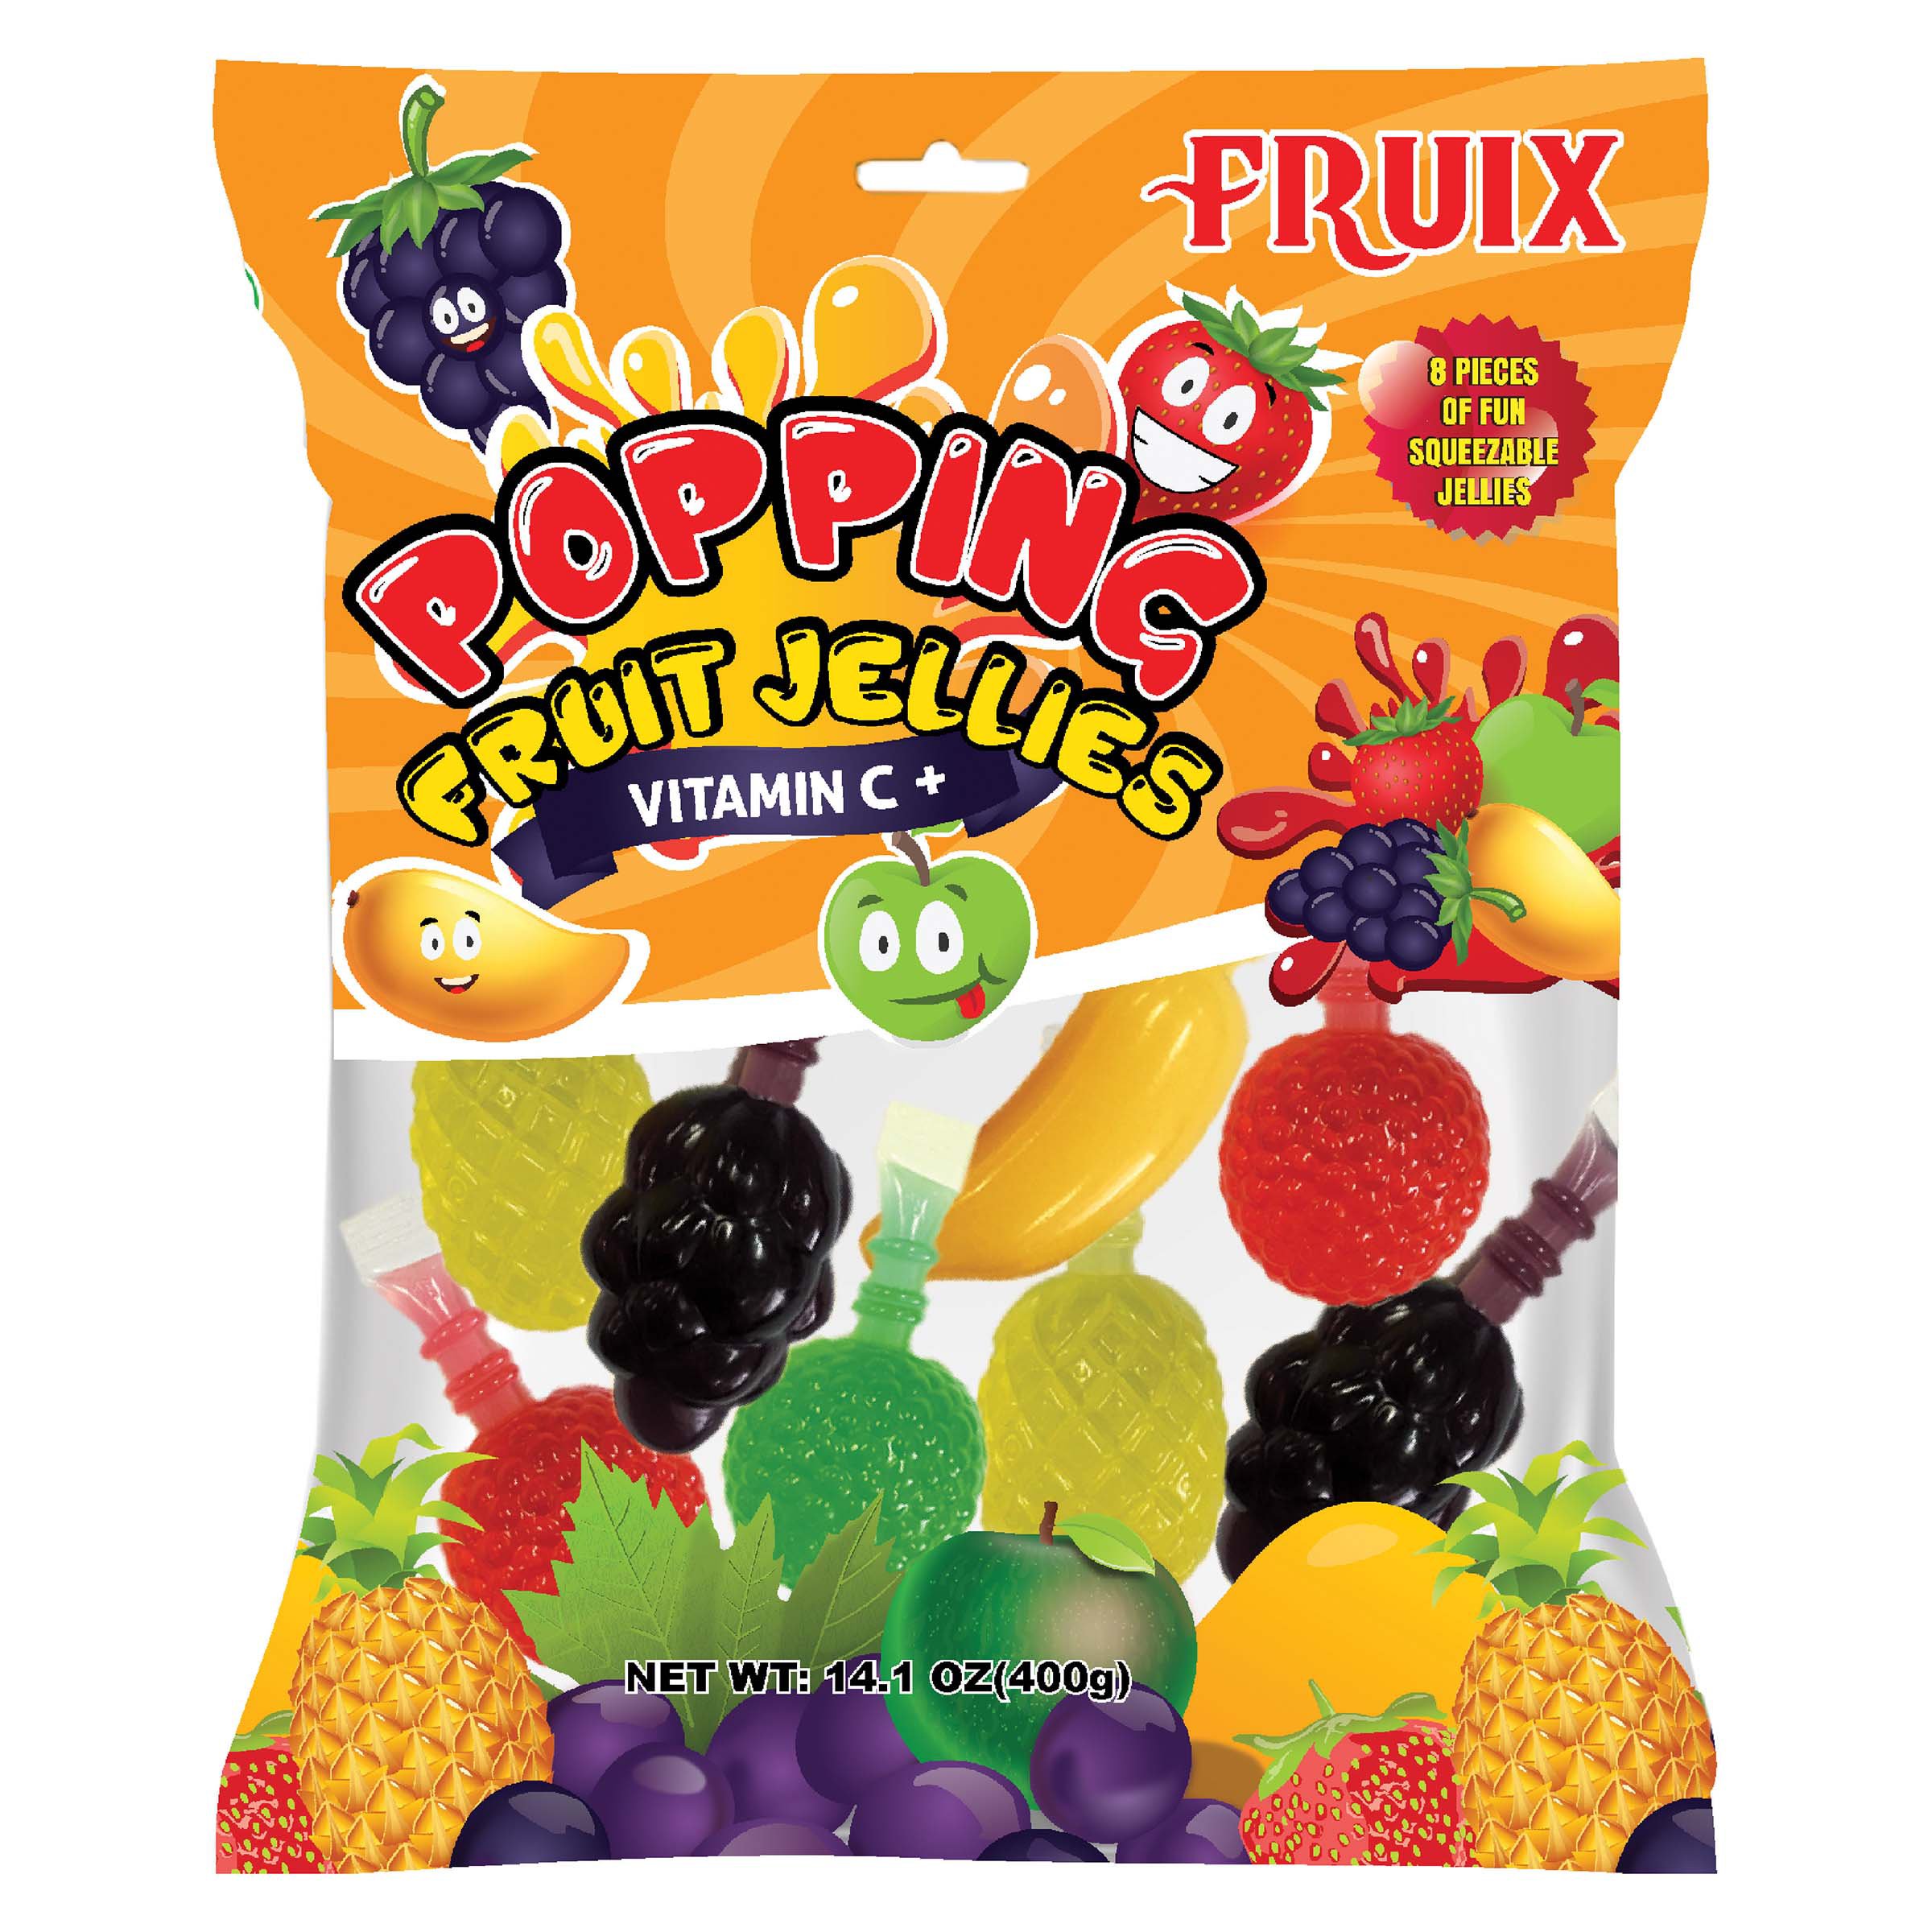 Fruix Popping Fruit Jellies with Vitamin C+